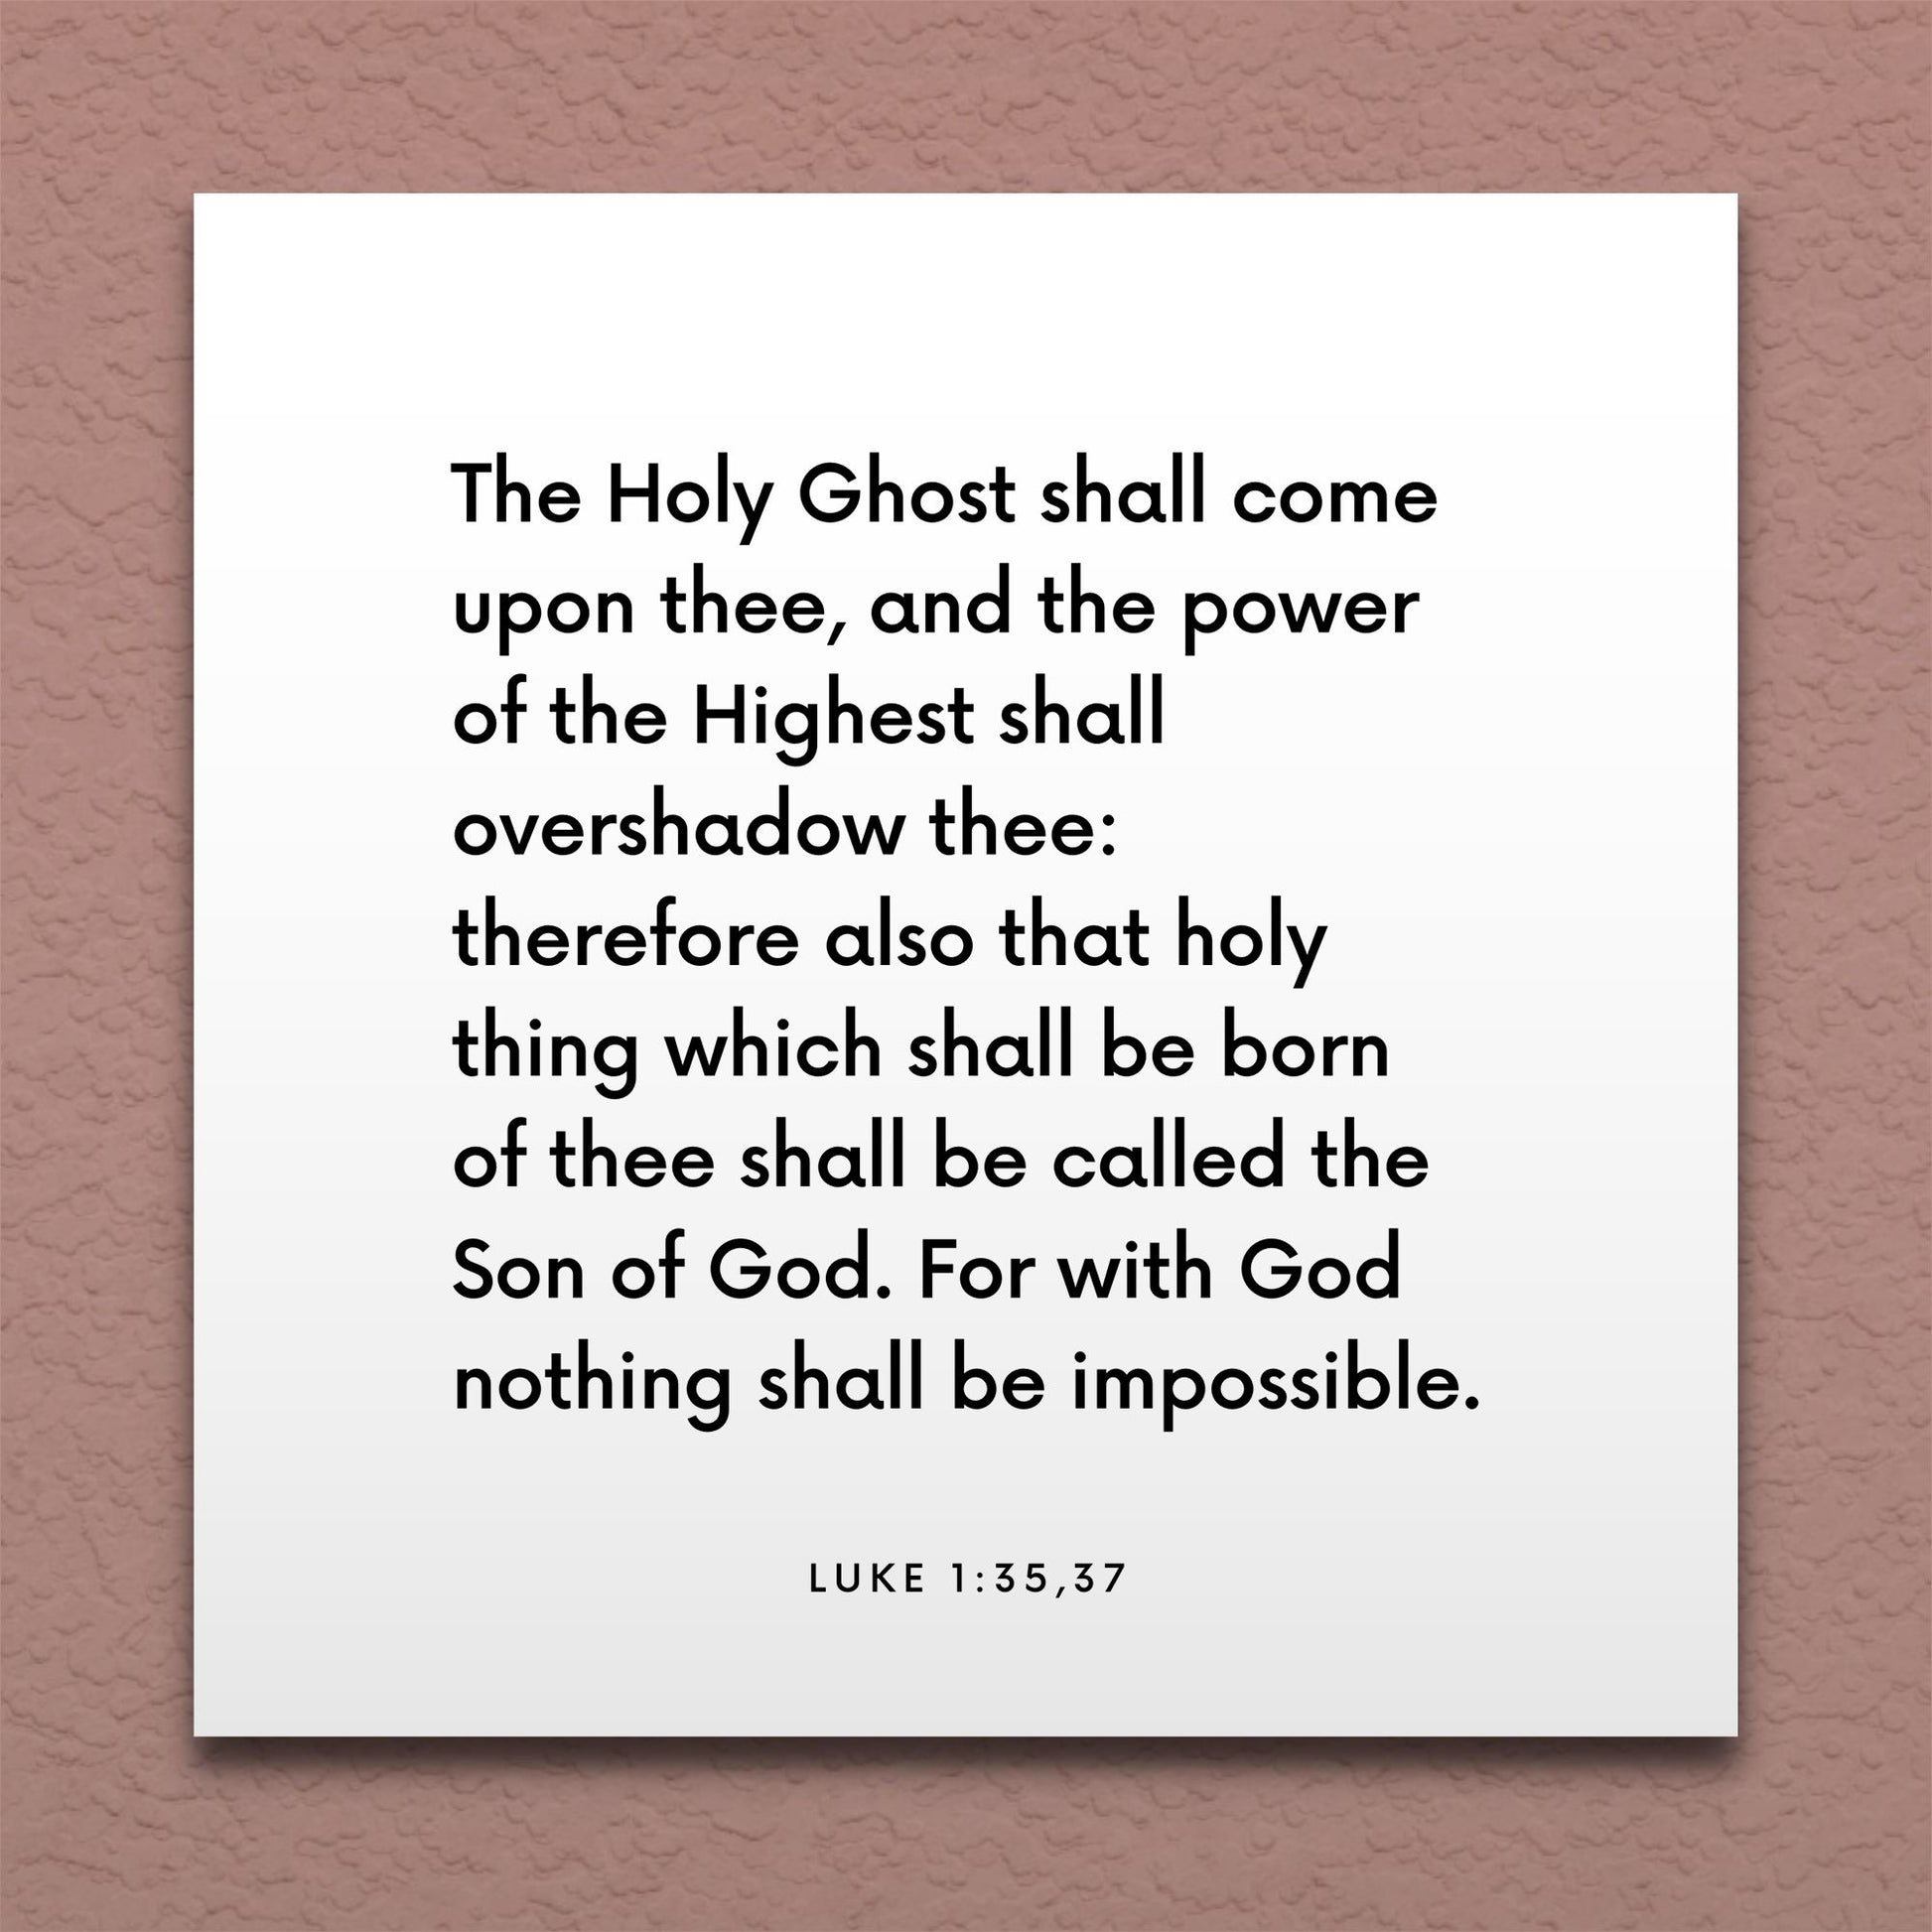 Wall-mounted scripture tile for Luke 1:35,37 - "The Holy Ghost shall come upon thee"